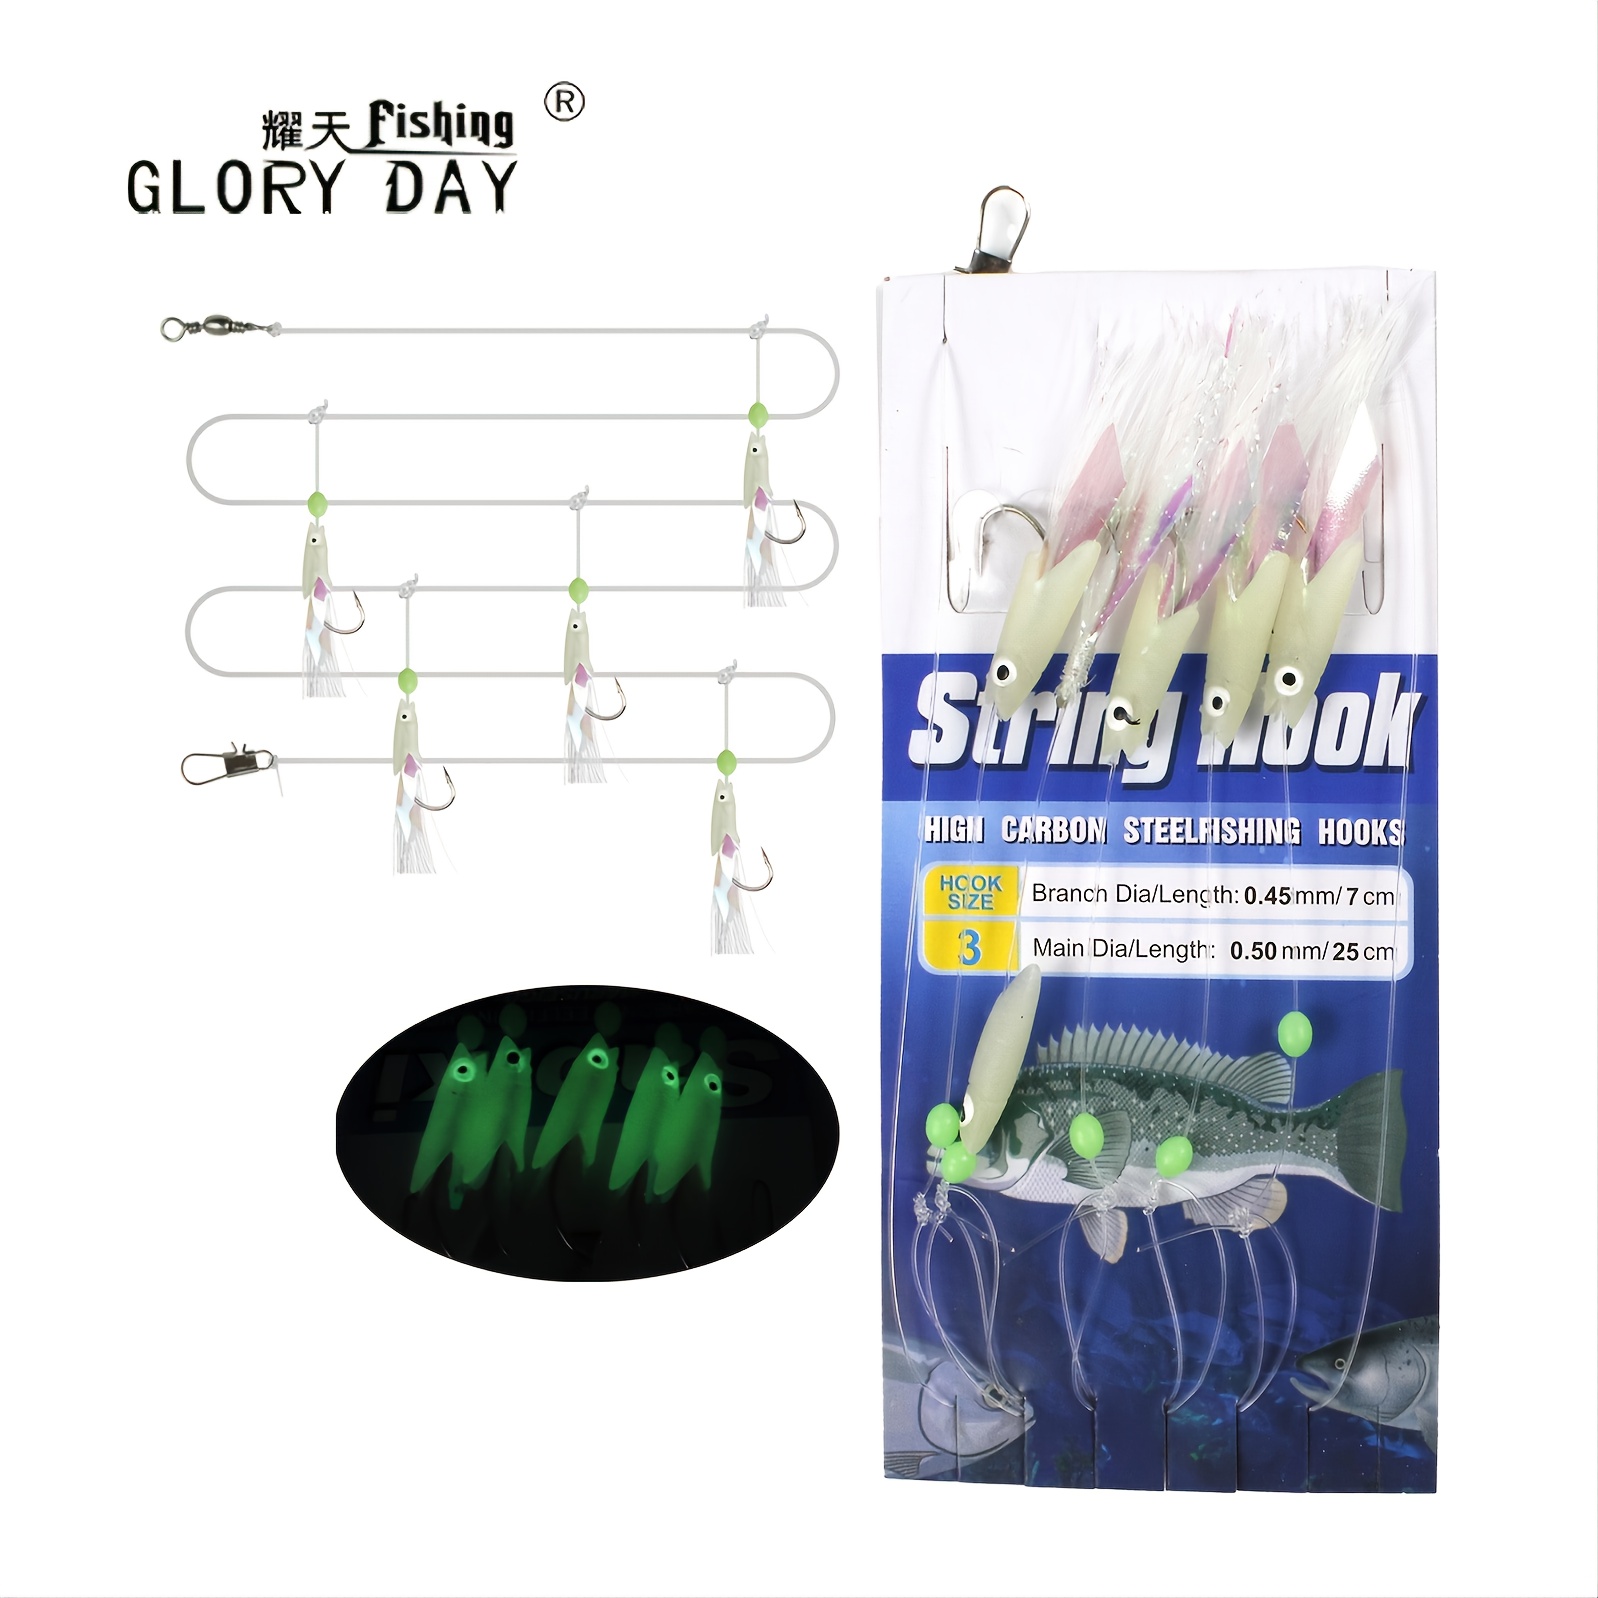 Glory Day Fishing Bionic Bait String Hook Anti Entangling 5 Hook White Bar  Cock Mouth Hook Sea Fishing String Hook Group, Check Out Today's Deals Now